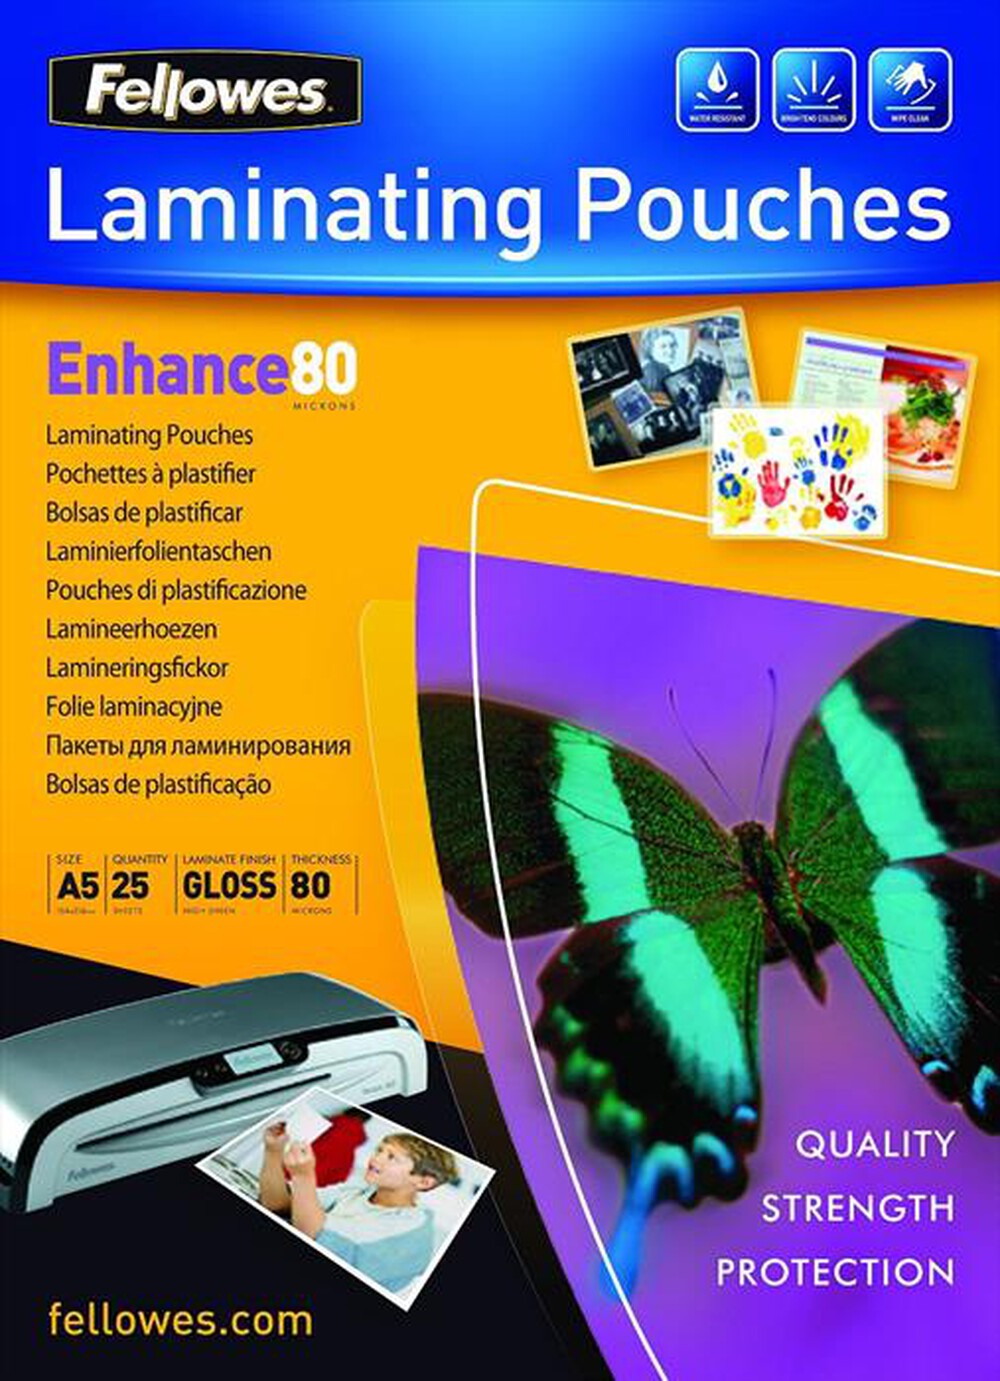 "FELLOWES - Laminating Pouches - "